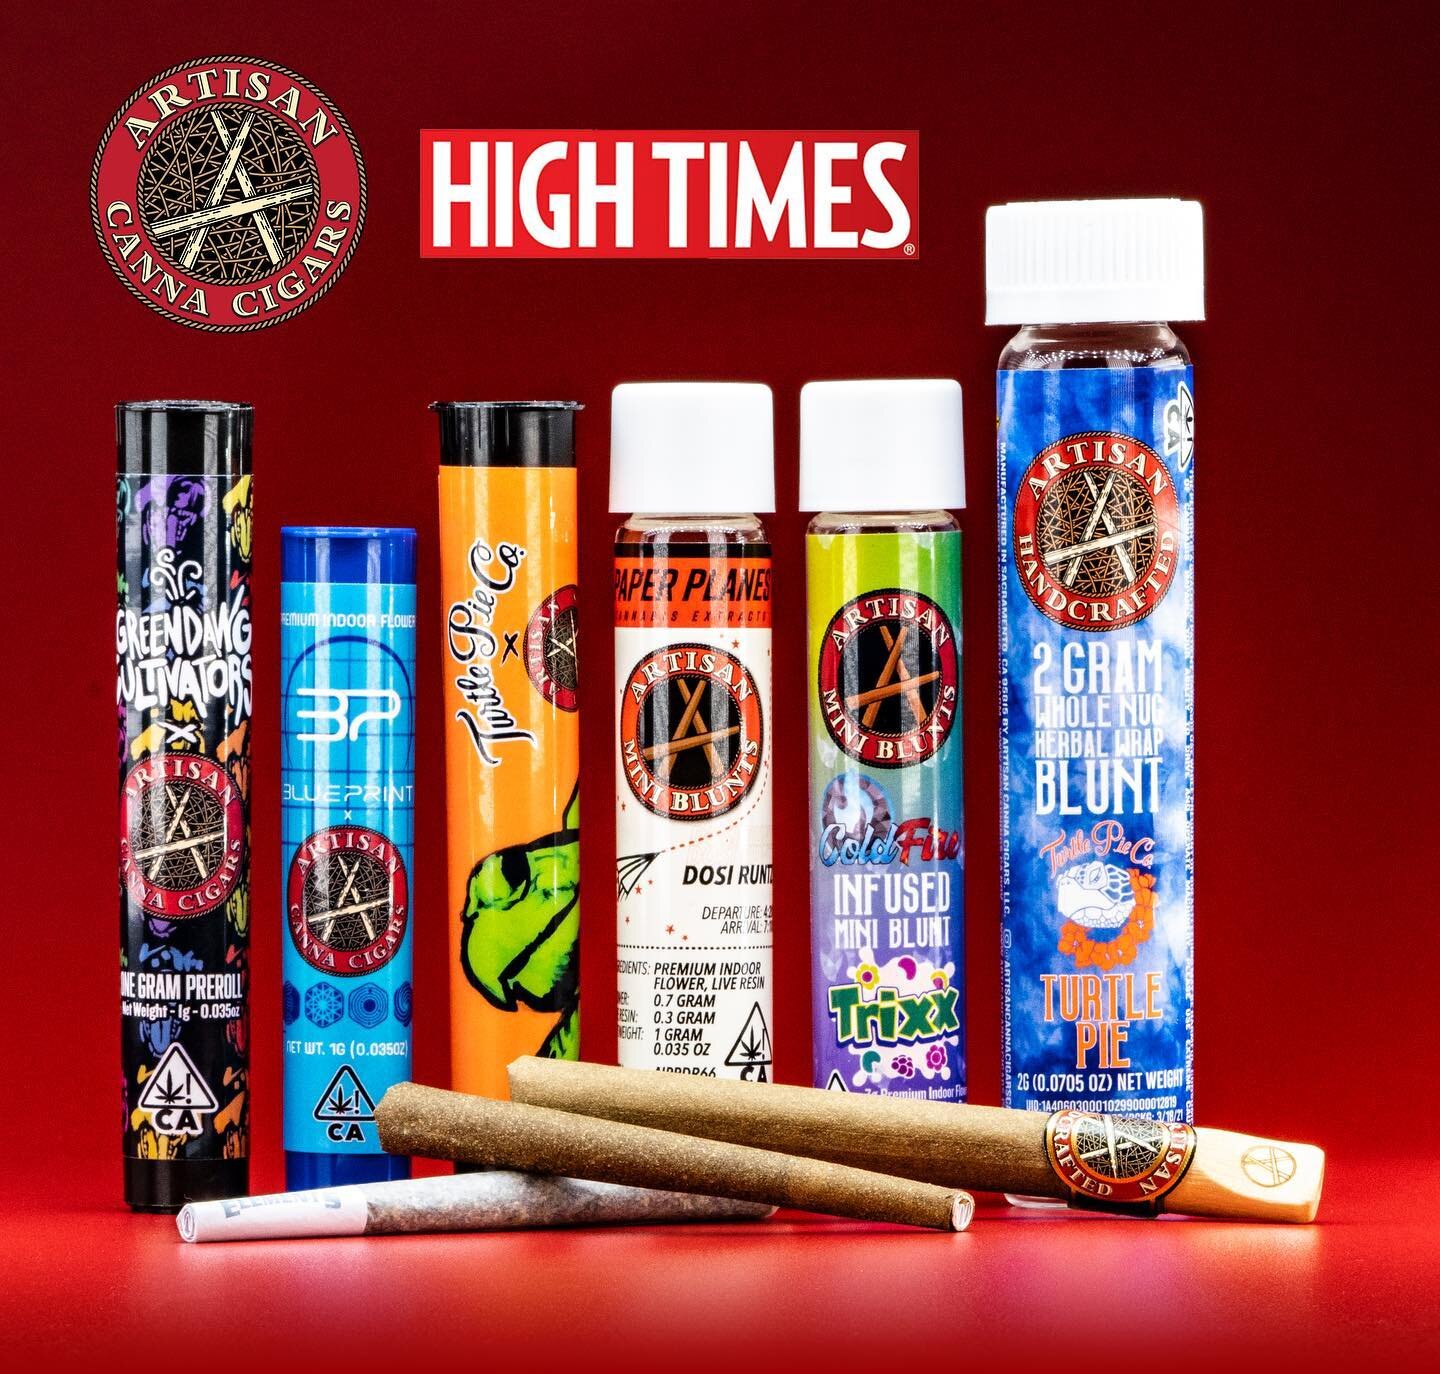 Fun Times w/ @hightimessanbernardino they just got a  deliver w/ @greendawgca @blueprint_california @turtlepieco @paperplanes.extracts @coldfireextractzs collab Pre-Rolls, Mini Blunts &amp; 2G Blunts! Stop by and see for yourself!